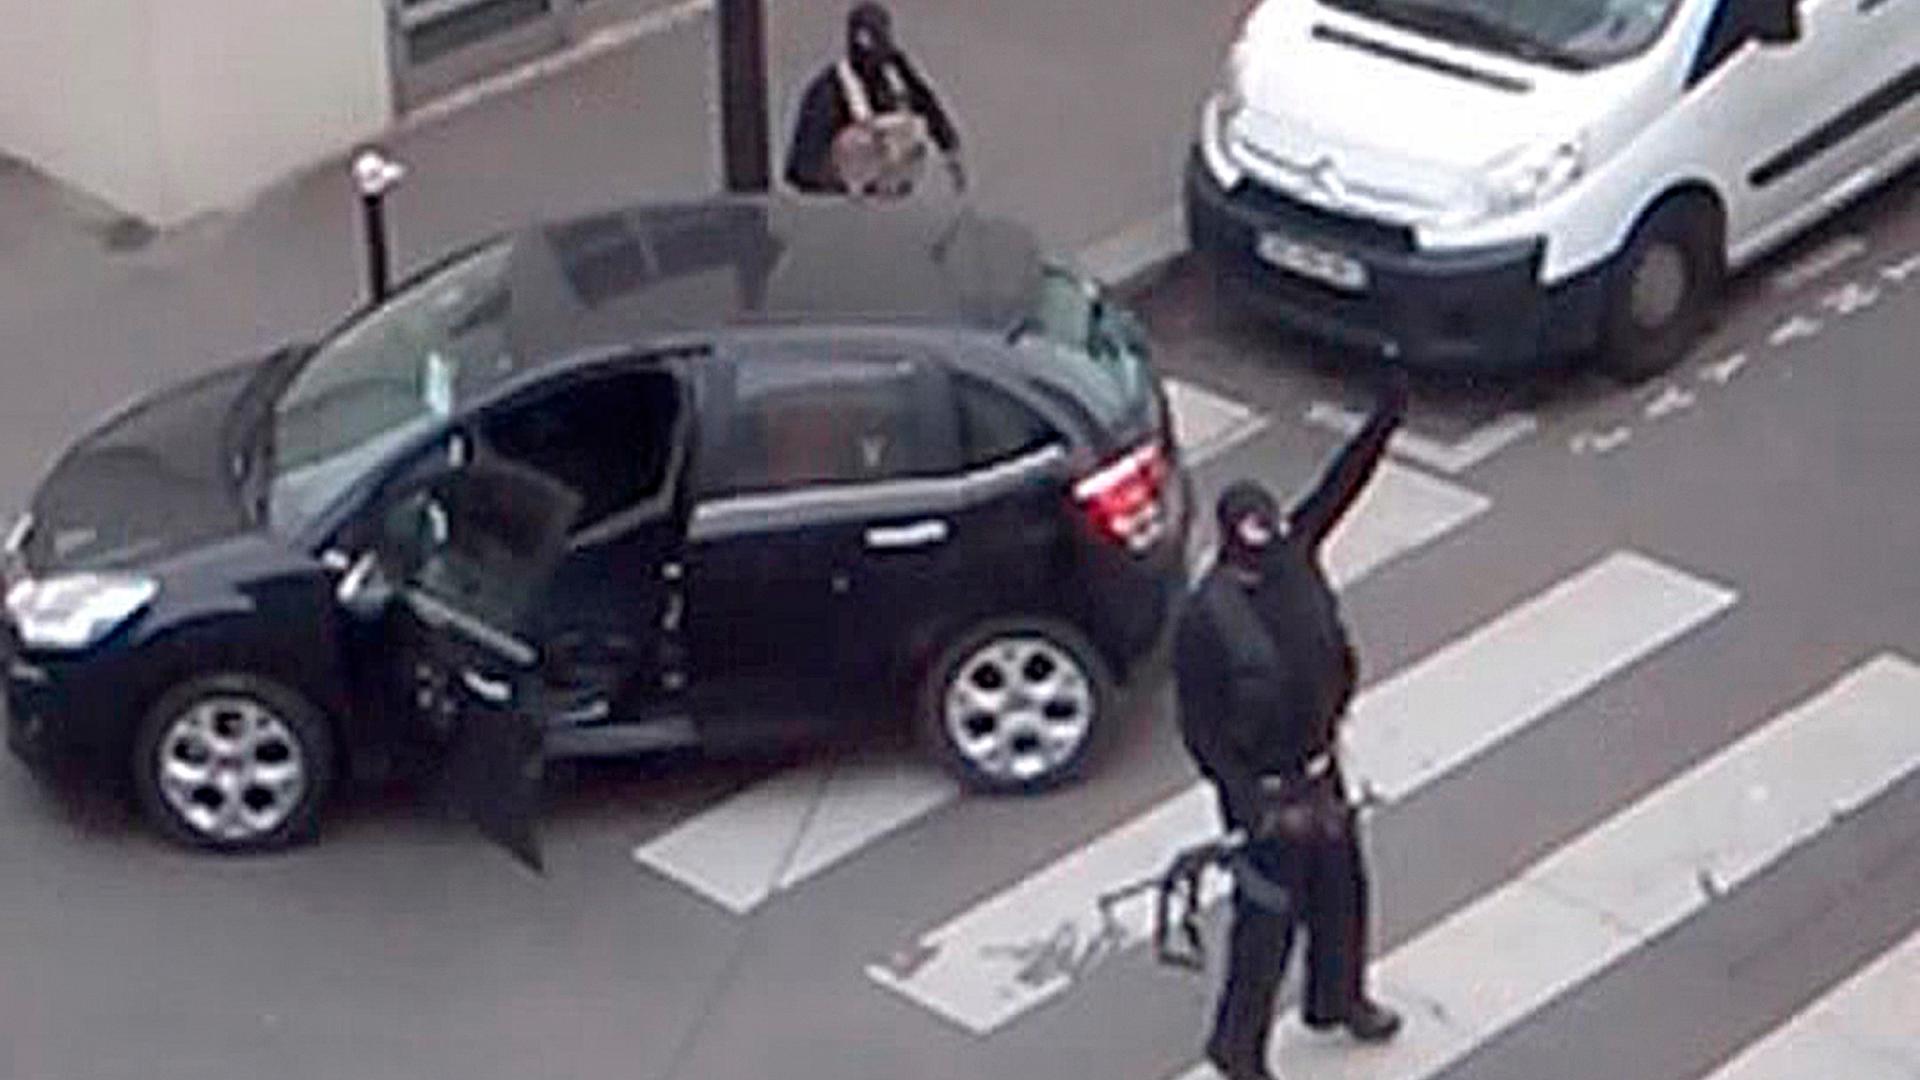 The Kouachi brothers gesture after shooting up the Charlie Hebdo office in Paris last week.